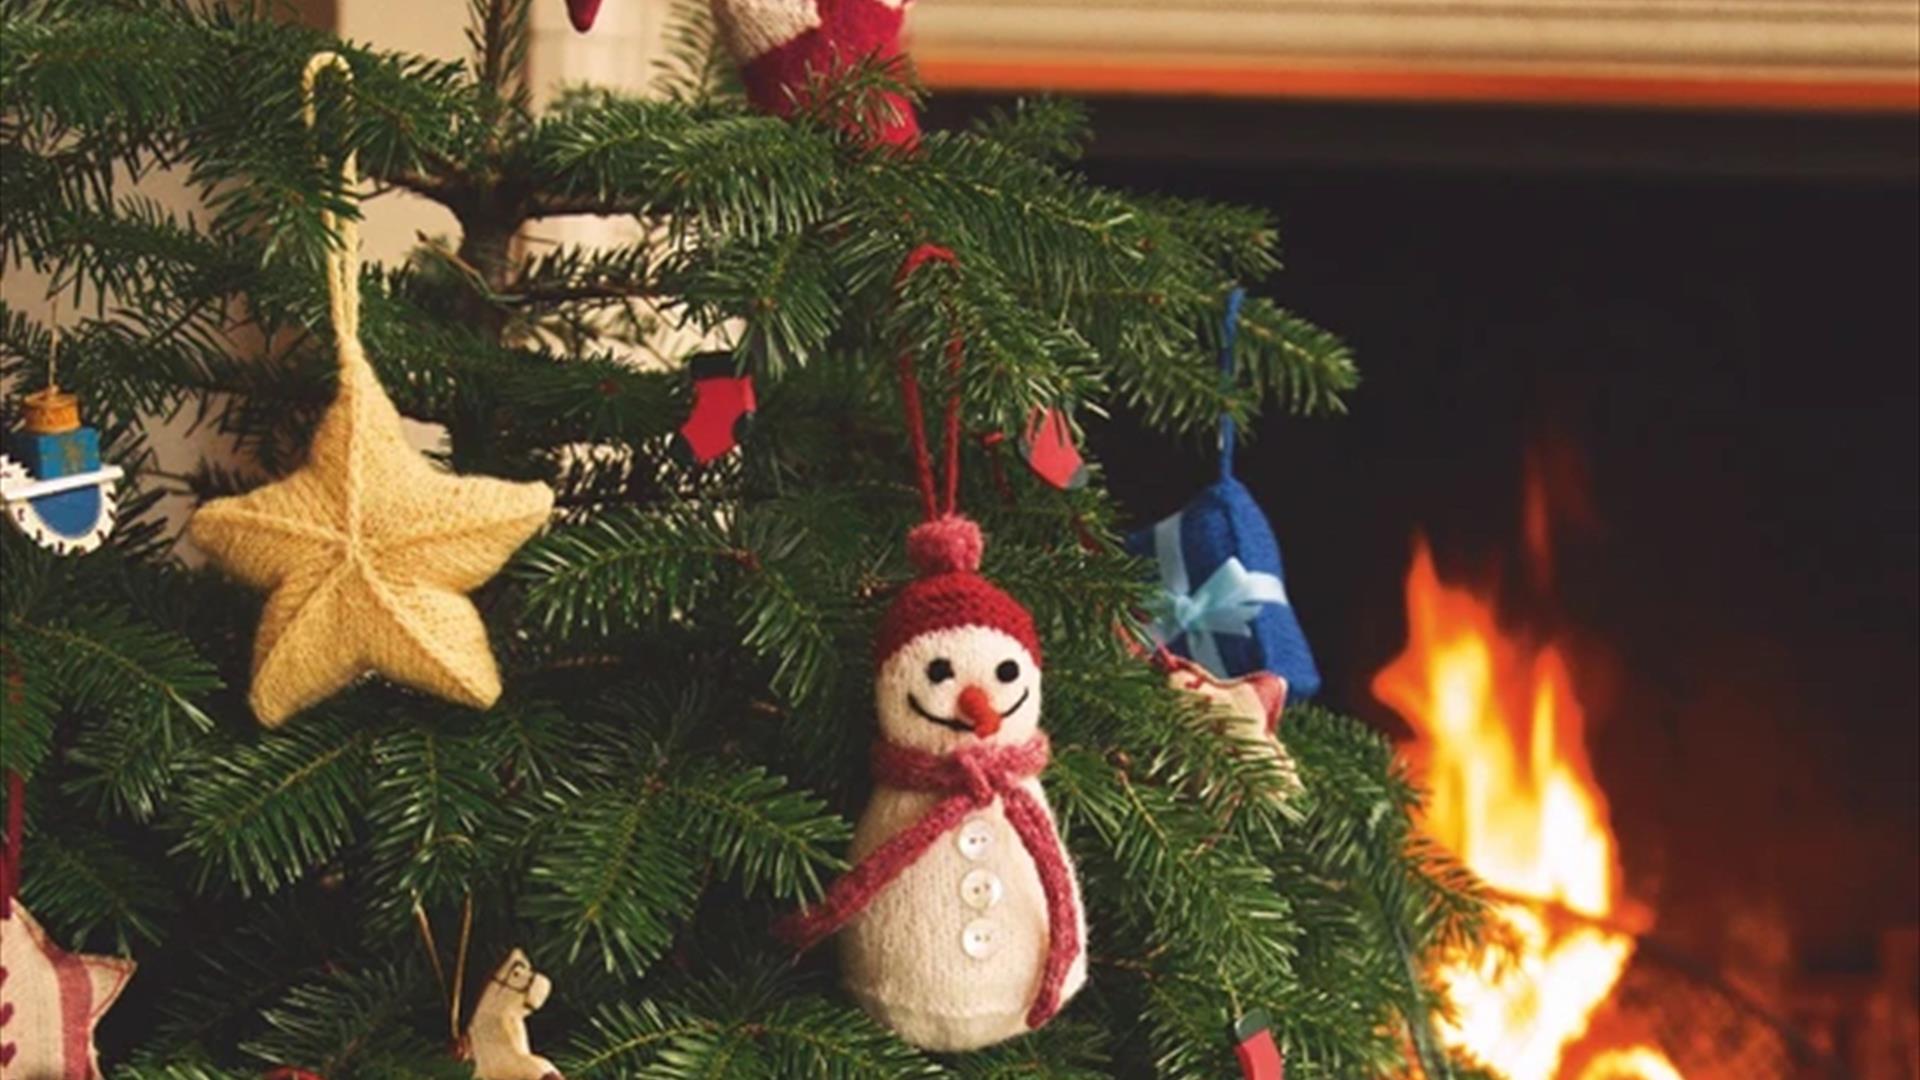 Picture displaying a knitted snowman and a star hanging on a Christmas tree.